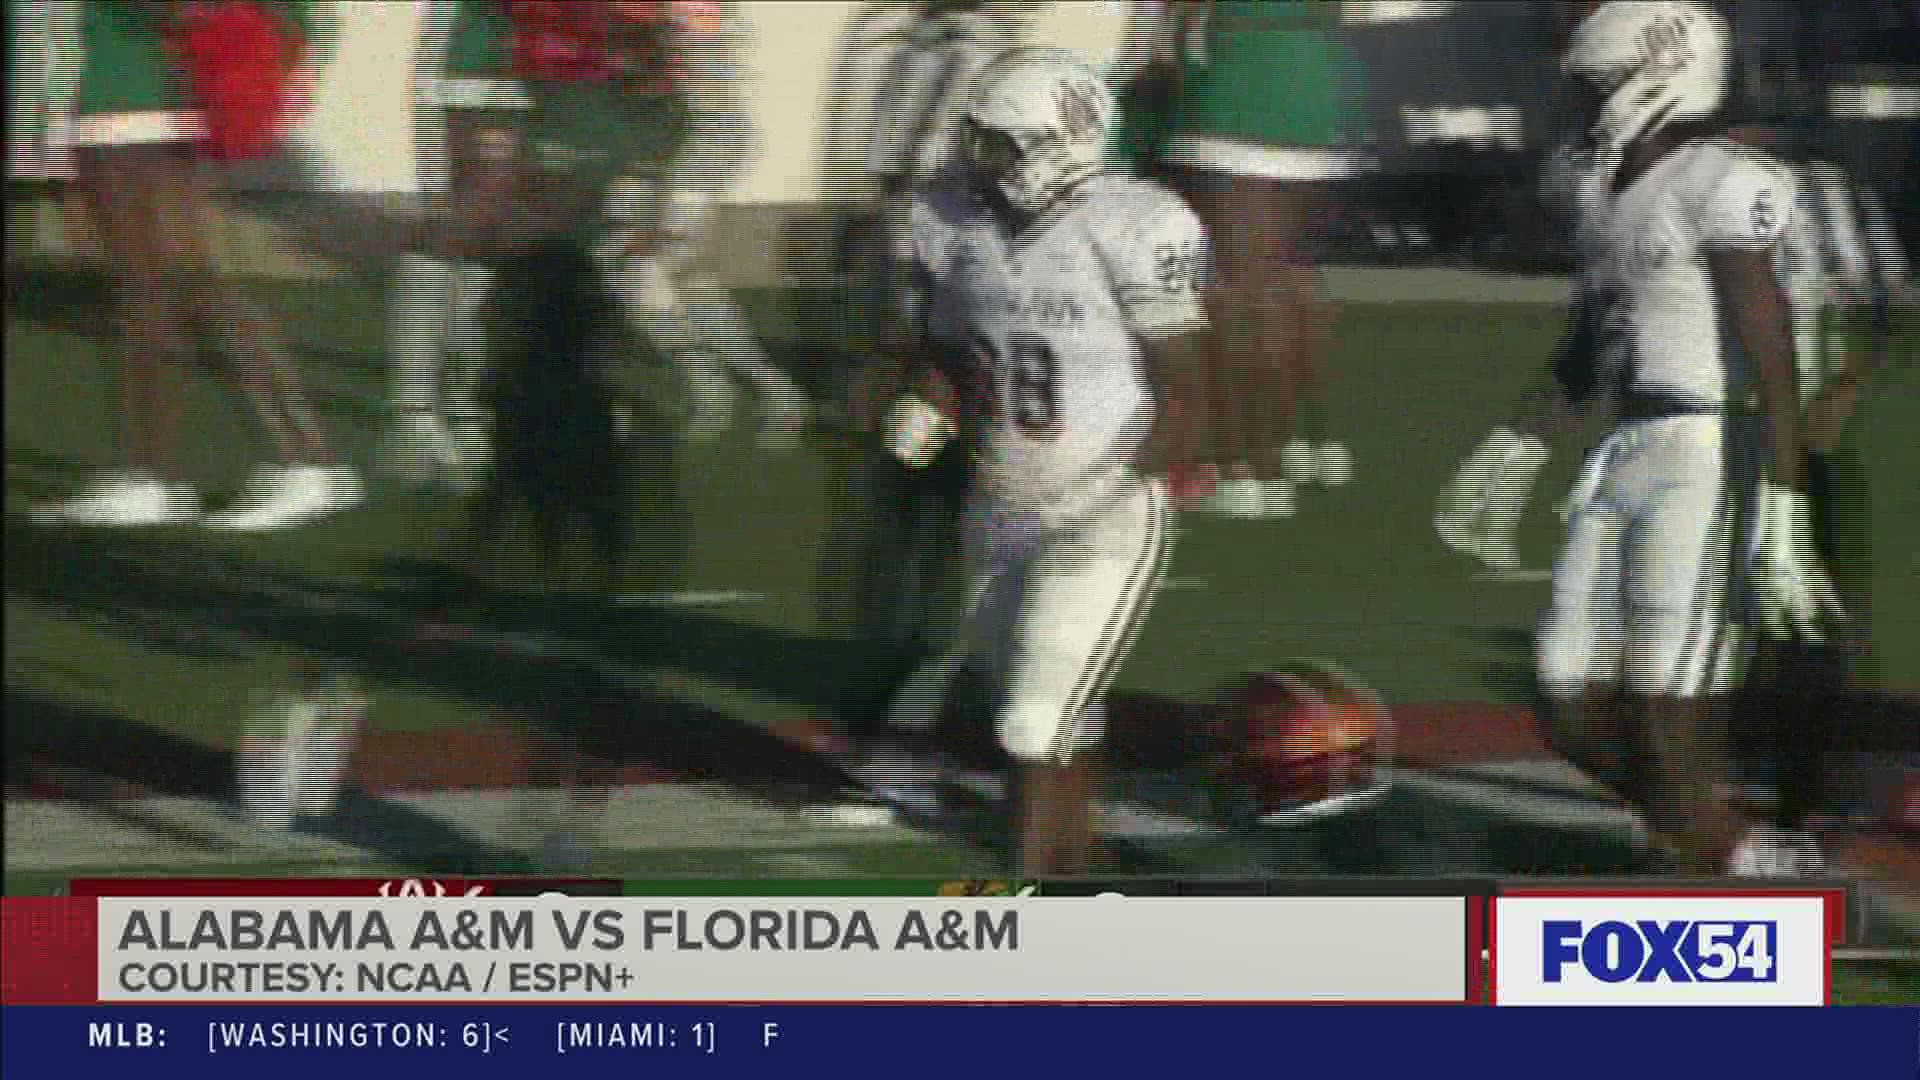 Alabama A&M blew a 19-7 lead in their 38-25 loss to Florida A&M on Saturday. The loss to FAMU drops Connell Maynor's team to 0-4 on the season